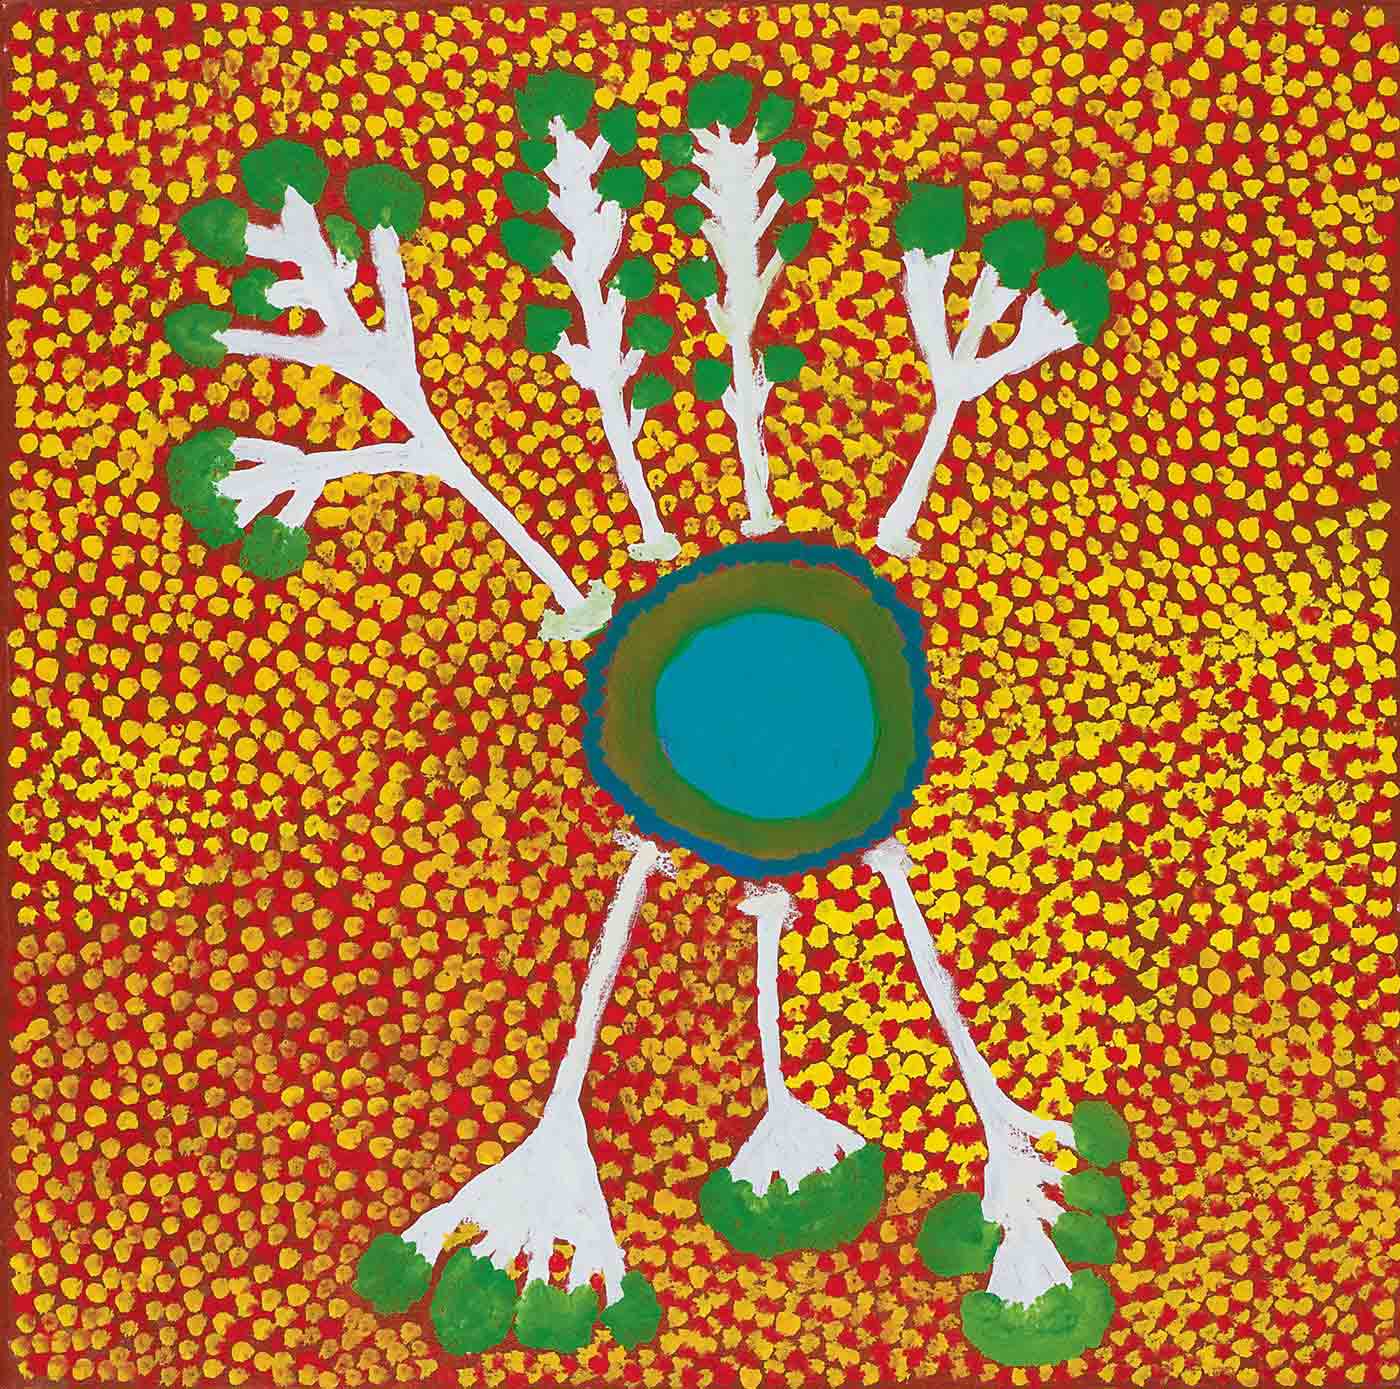 A square painting on canvas with a concentric circle in turquoise, green and blue in the centre with four tree branches in white and green protruding from the top, and three from the bottom. The background of the painting is brown with an overlay of yellow and red dots. - click to view larger image